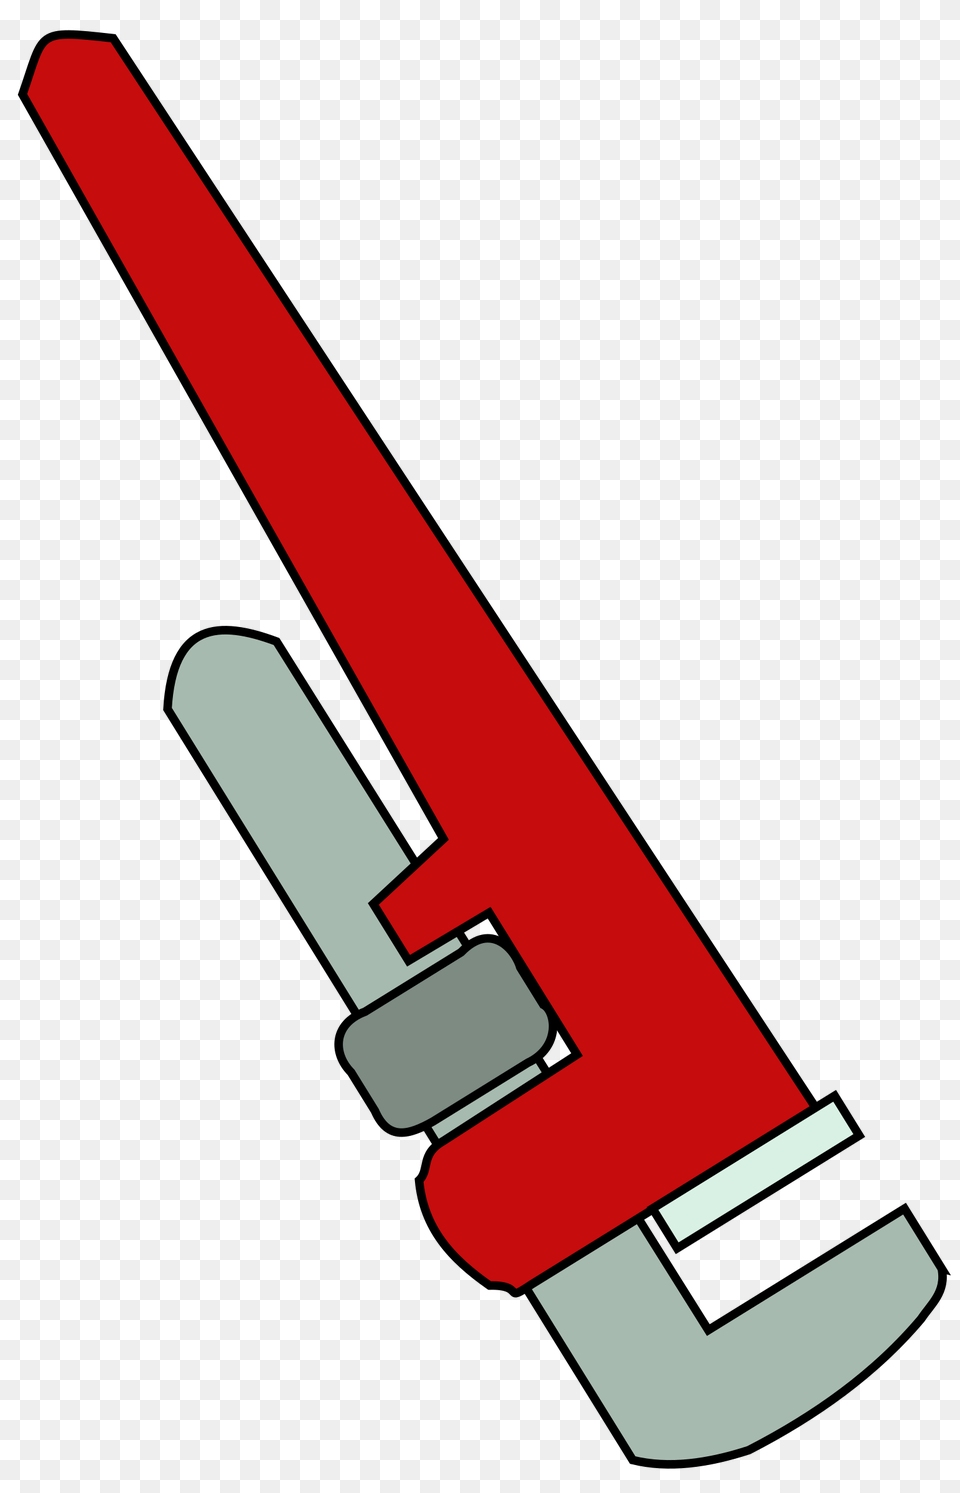 Pipe Wrench Icons Png